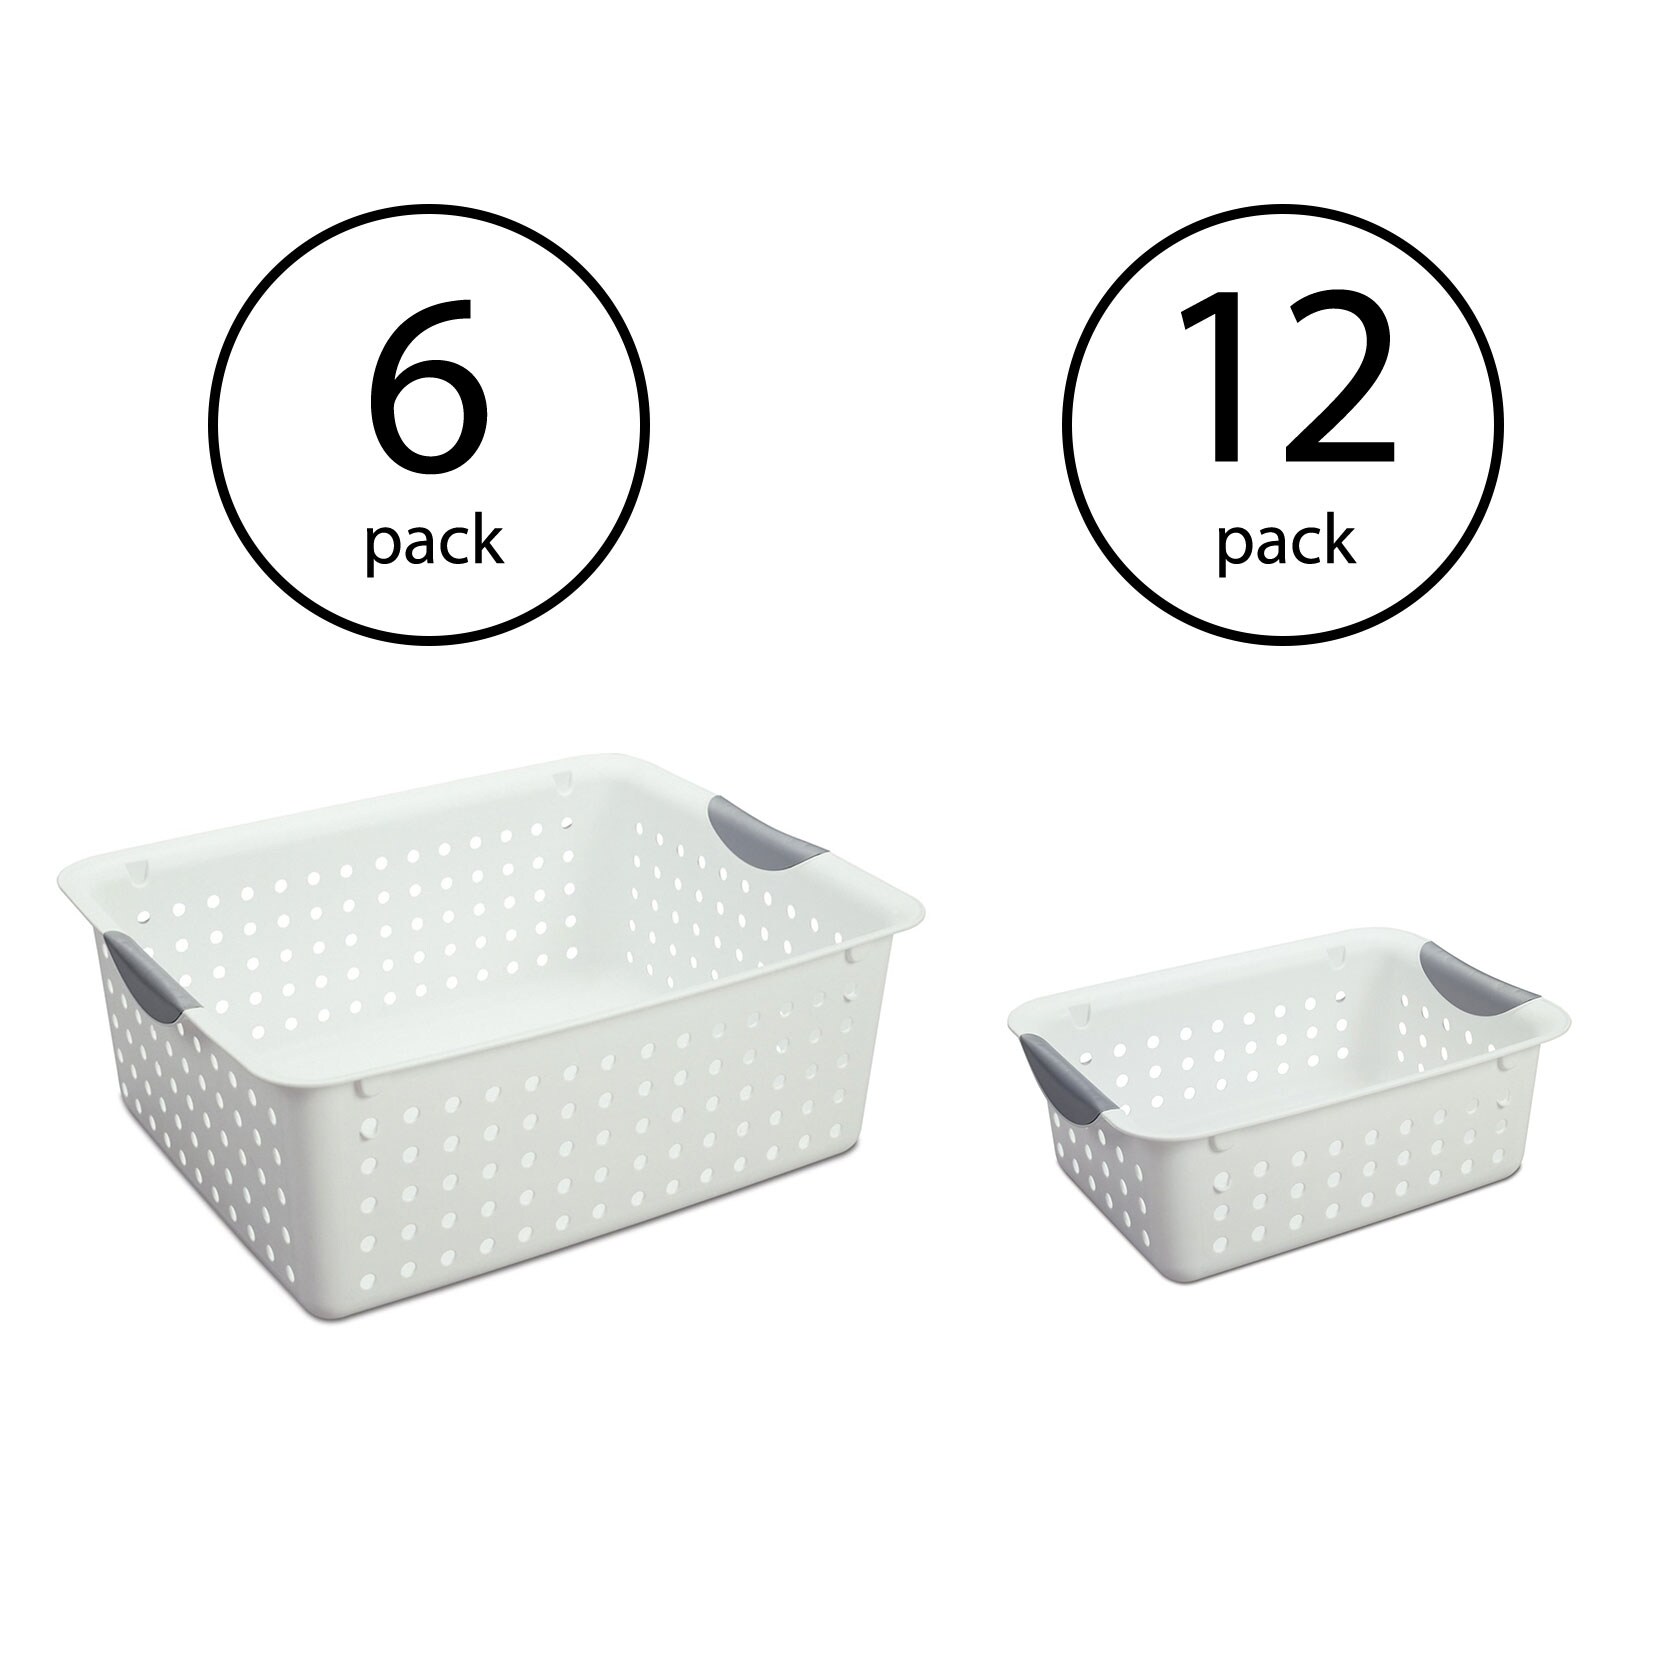 Sterilite Small Stacking Basket with 8 Pack, White